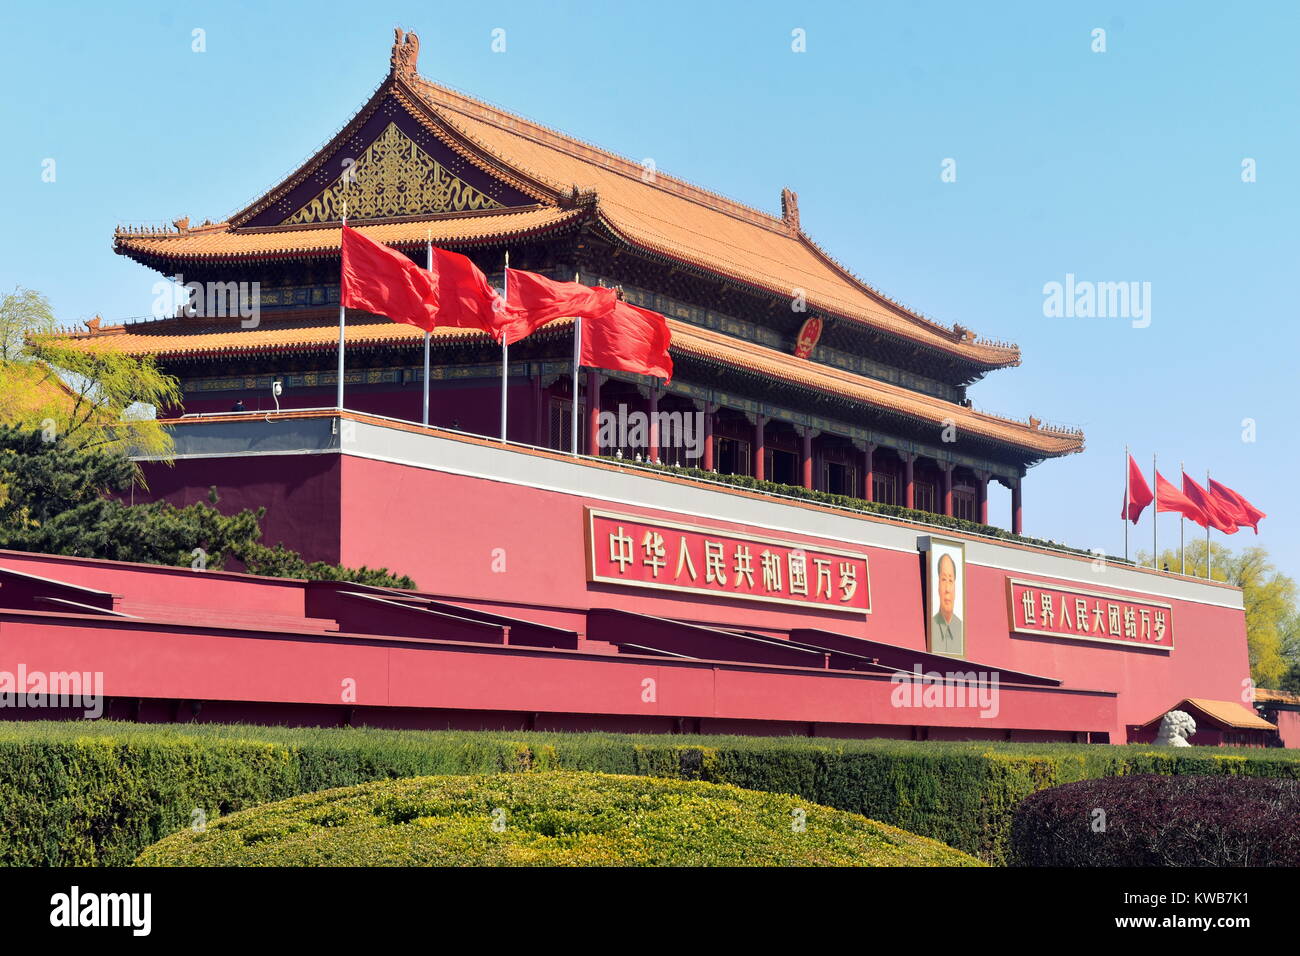 Tiananmen square Gate of Heavenly Peace, site of founding of People's Republic of China by Mao Zedong - Beijing Stock Photo